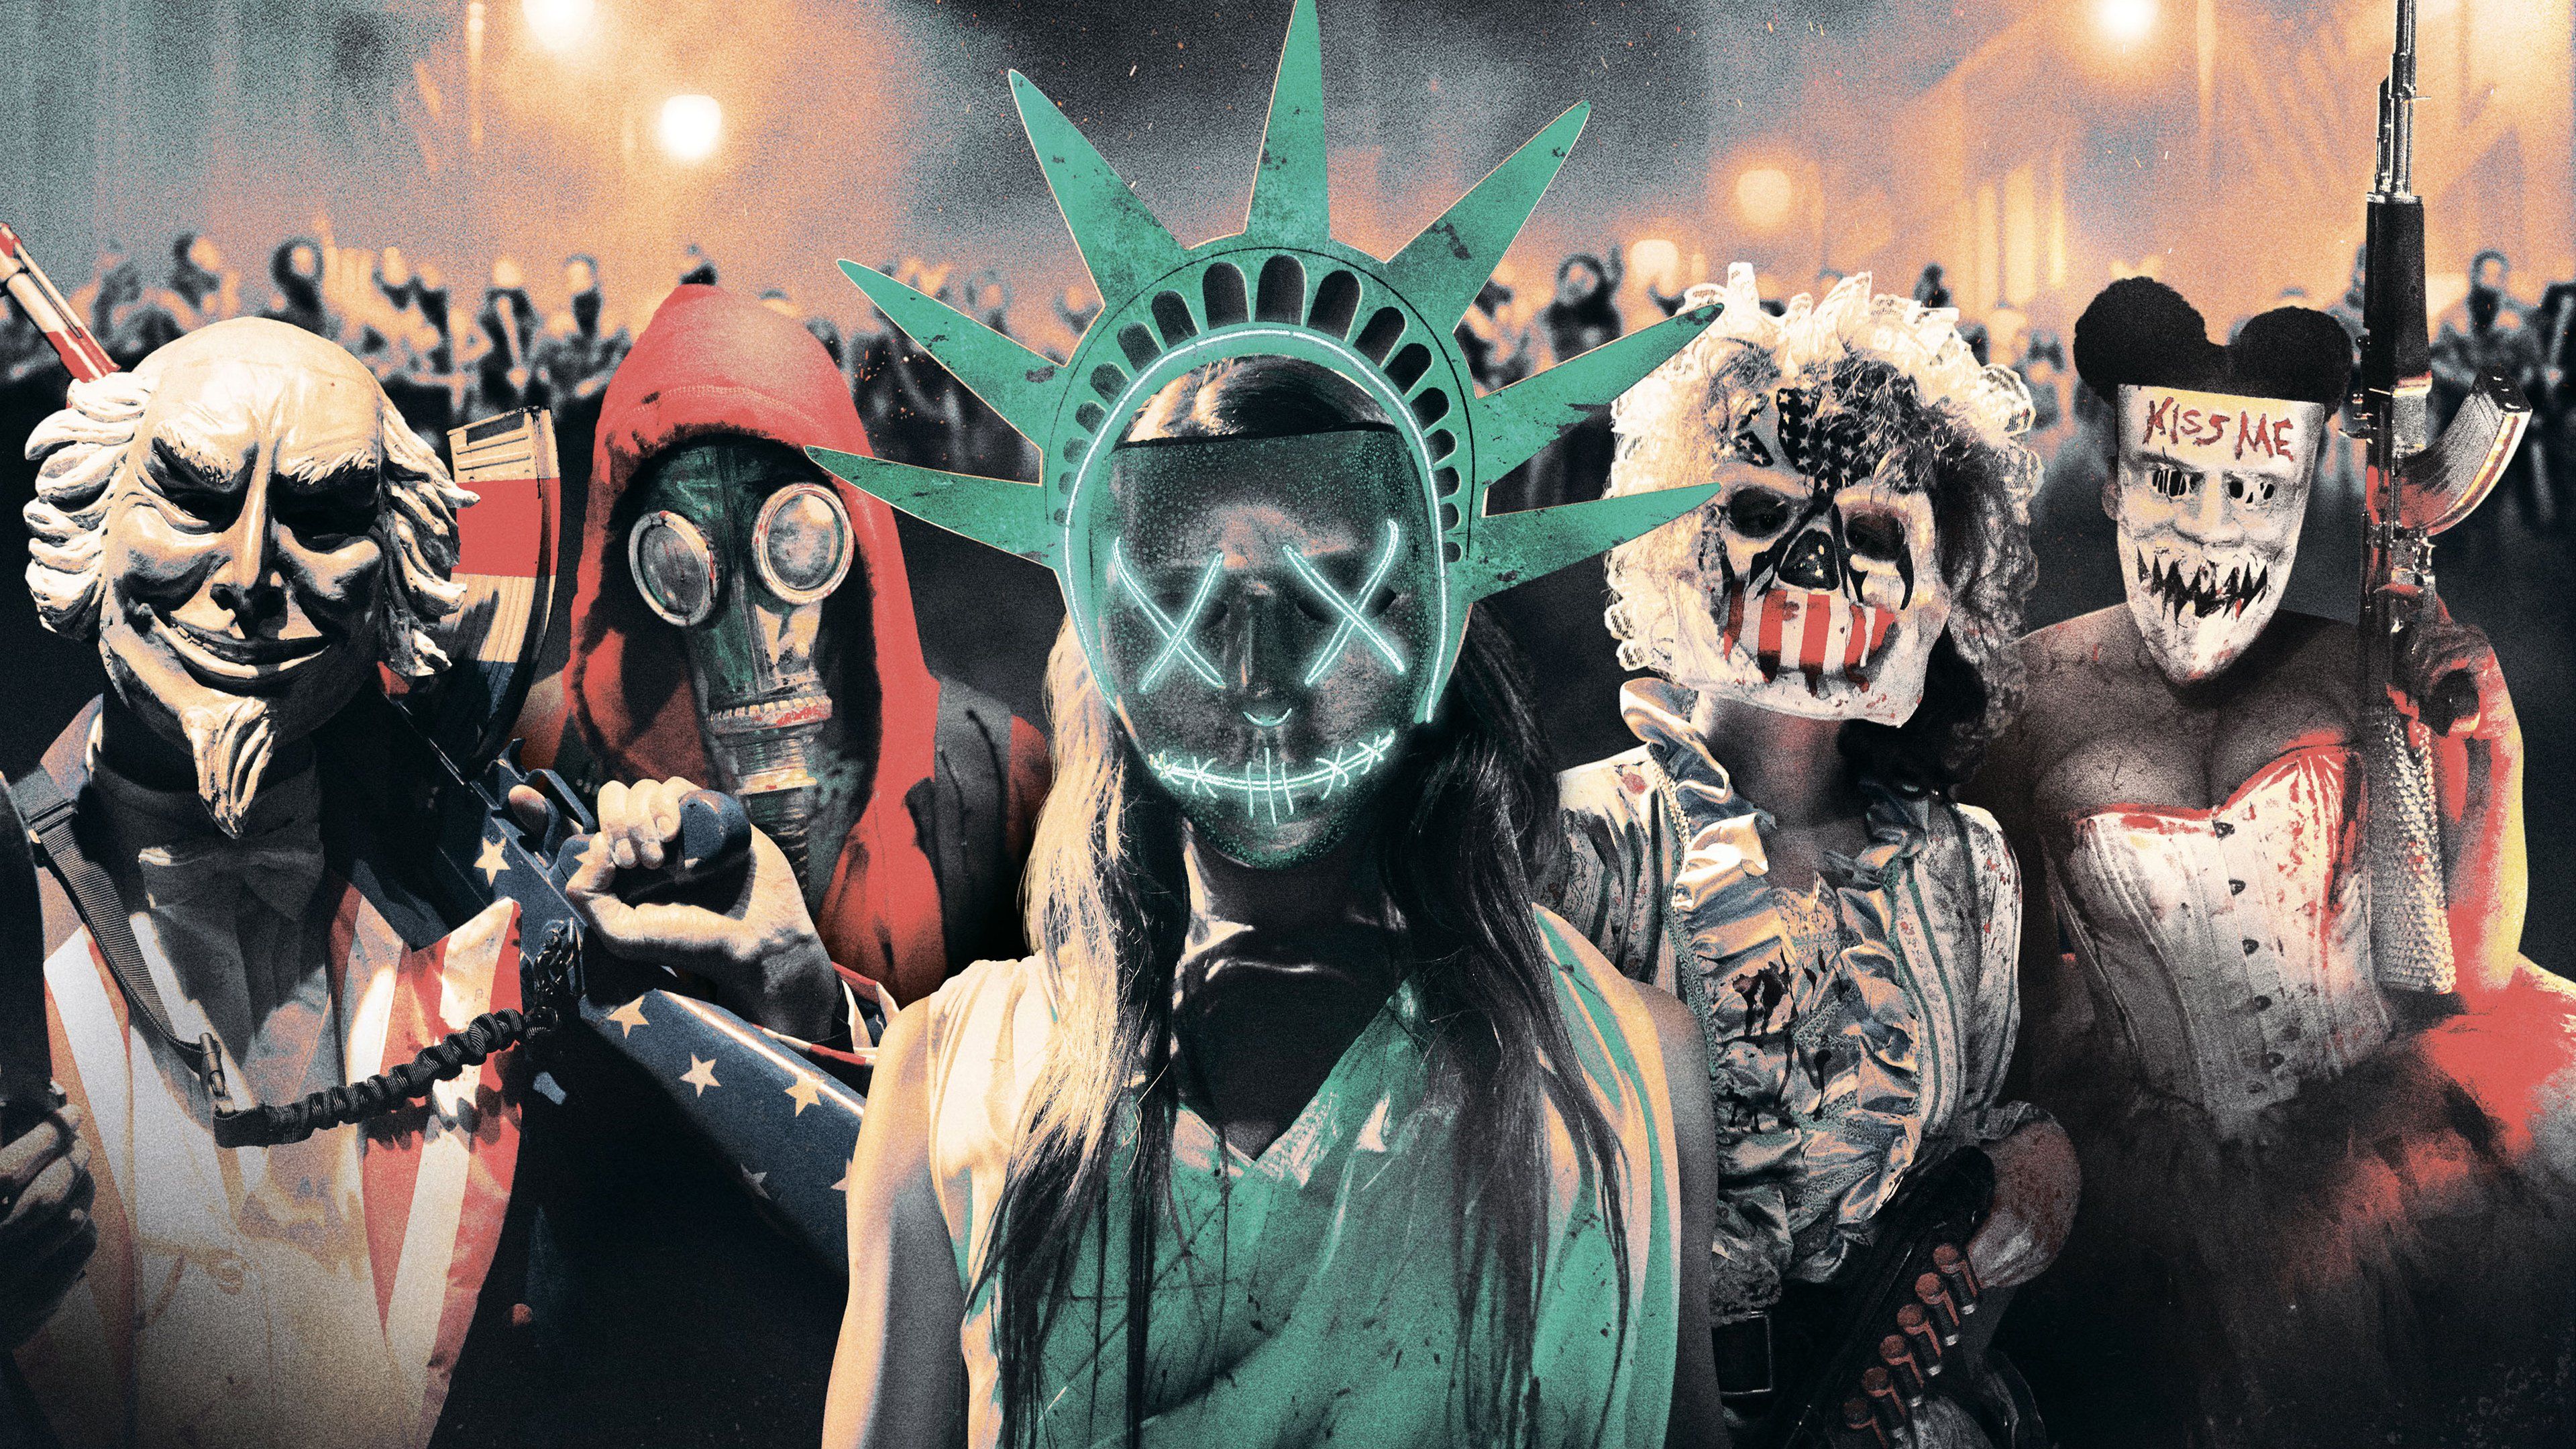 23 Best The Purge Costume Ideas 2020 Masks Outfit Ideas And More